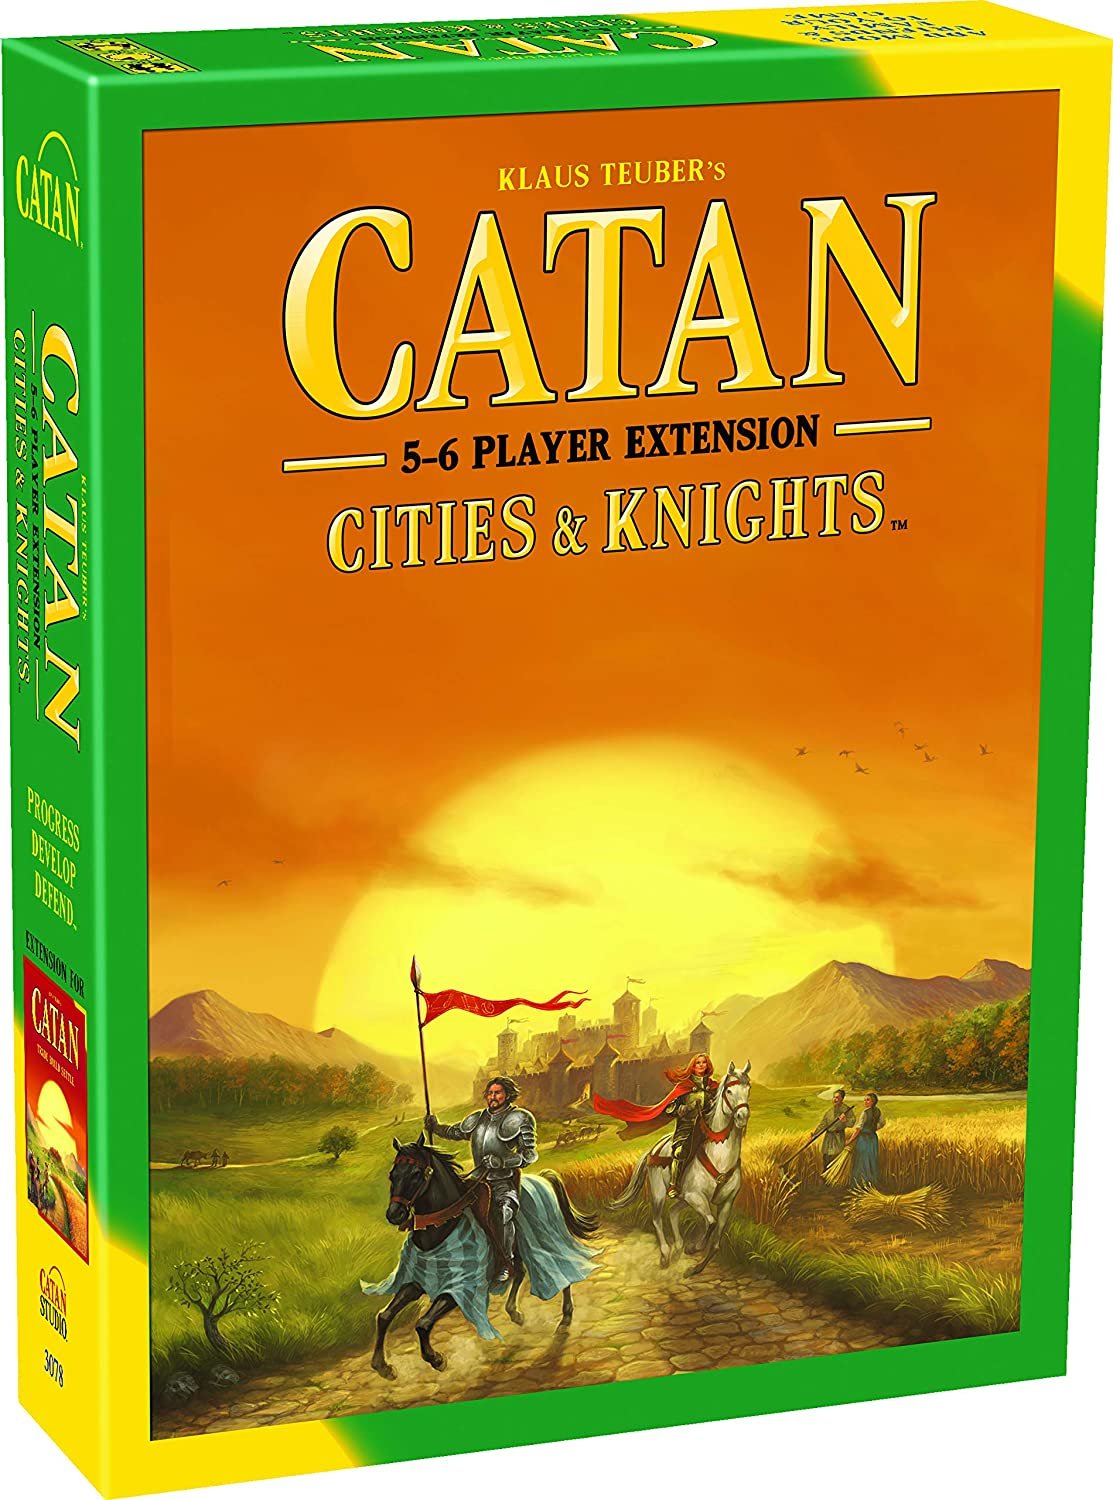 Catan Cities & Knights 5-6 exp